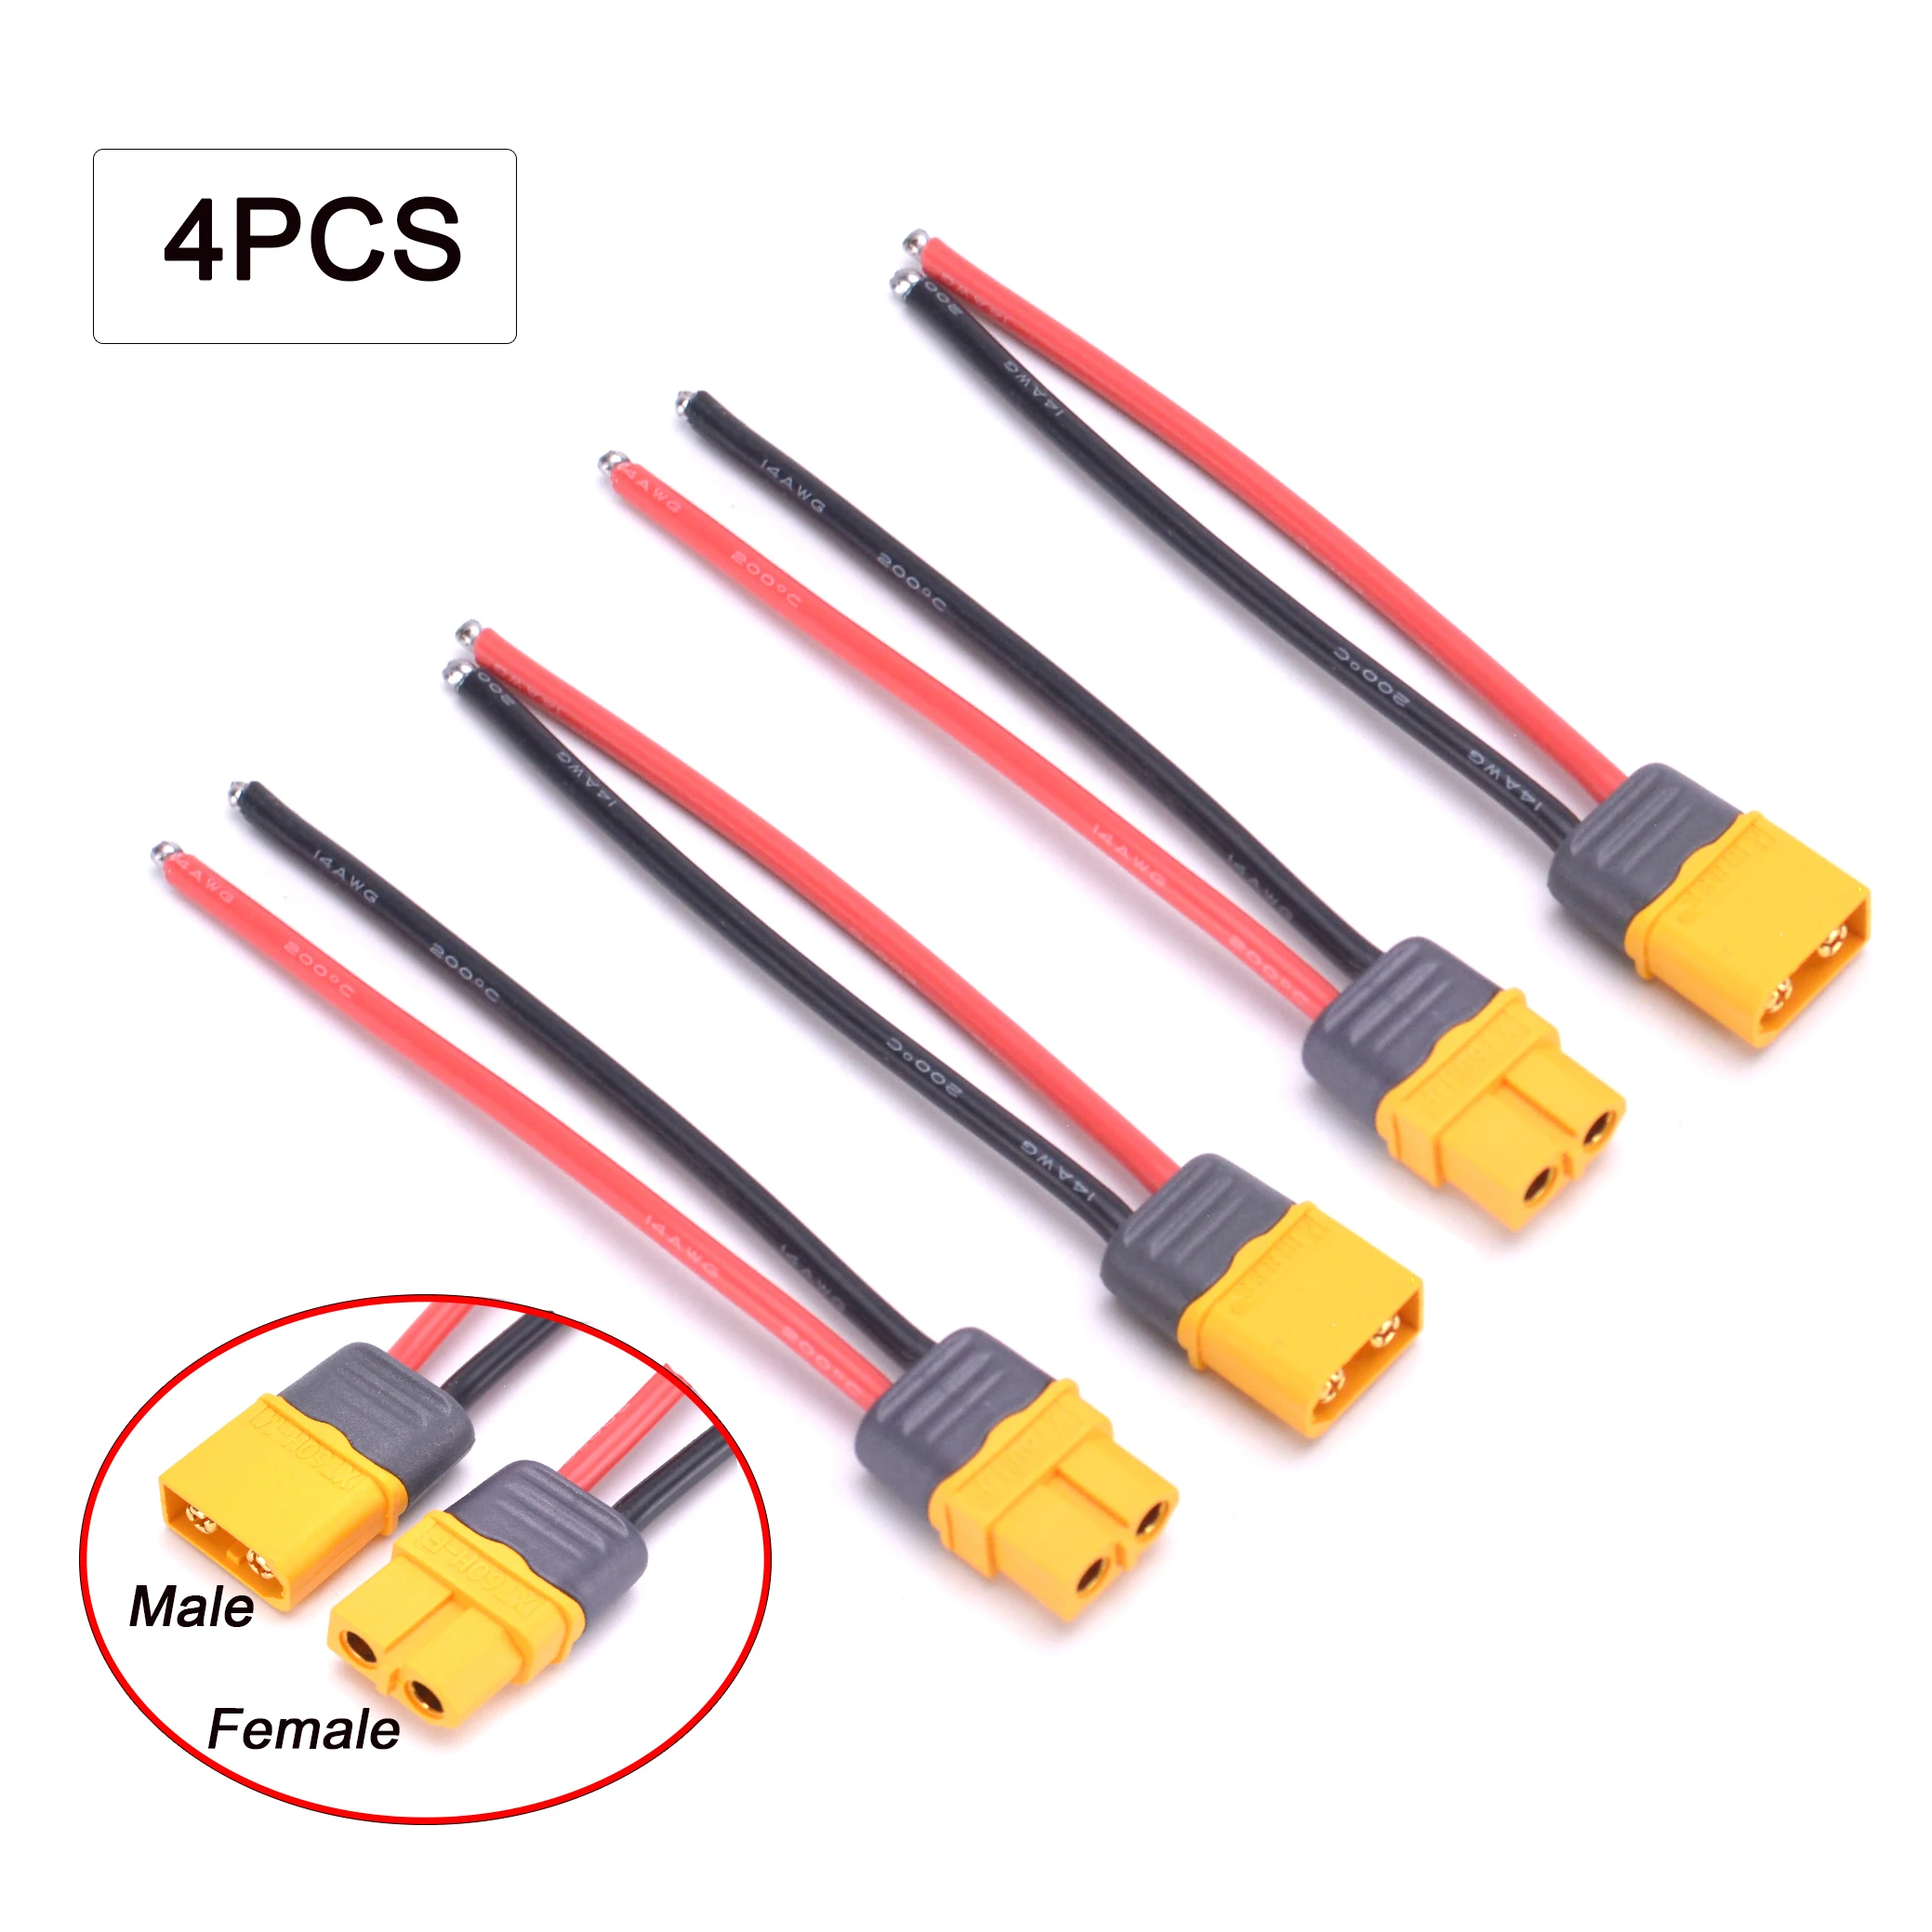 

2PCS / 4PCS Amass XT60 XT60H Male / Female Adapter connector with 14AWG 10cm 100mm Wire Cable for FPV Battery RC parts